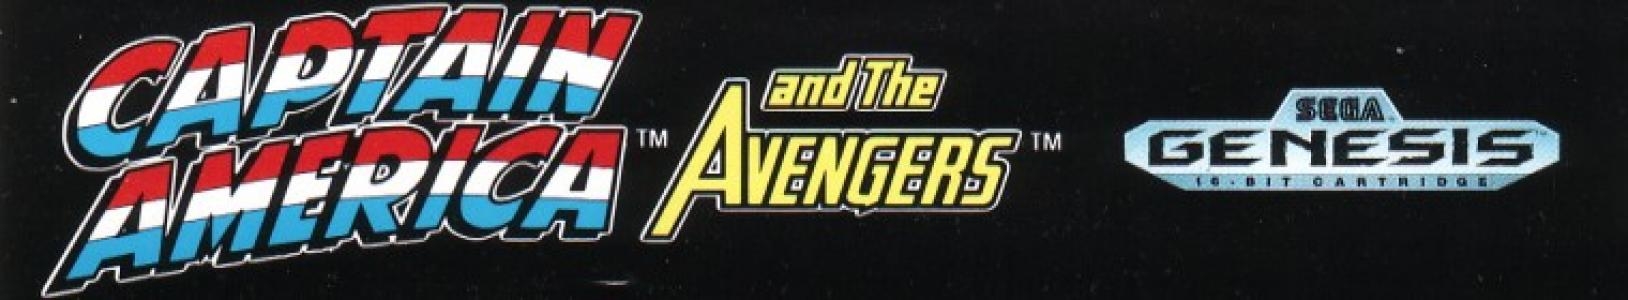 Captain America and the Avengers banner